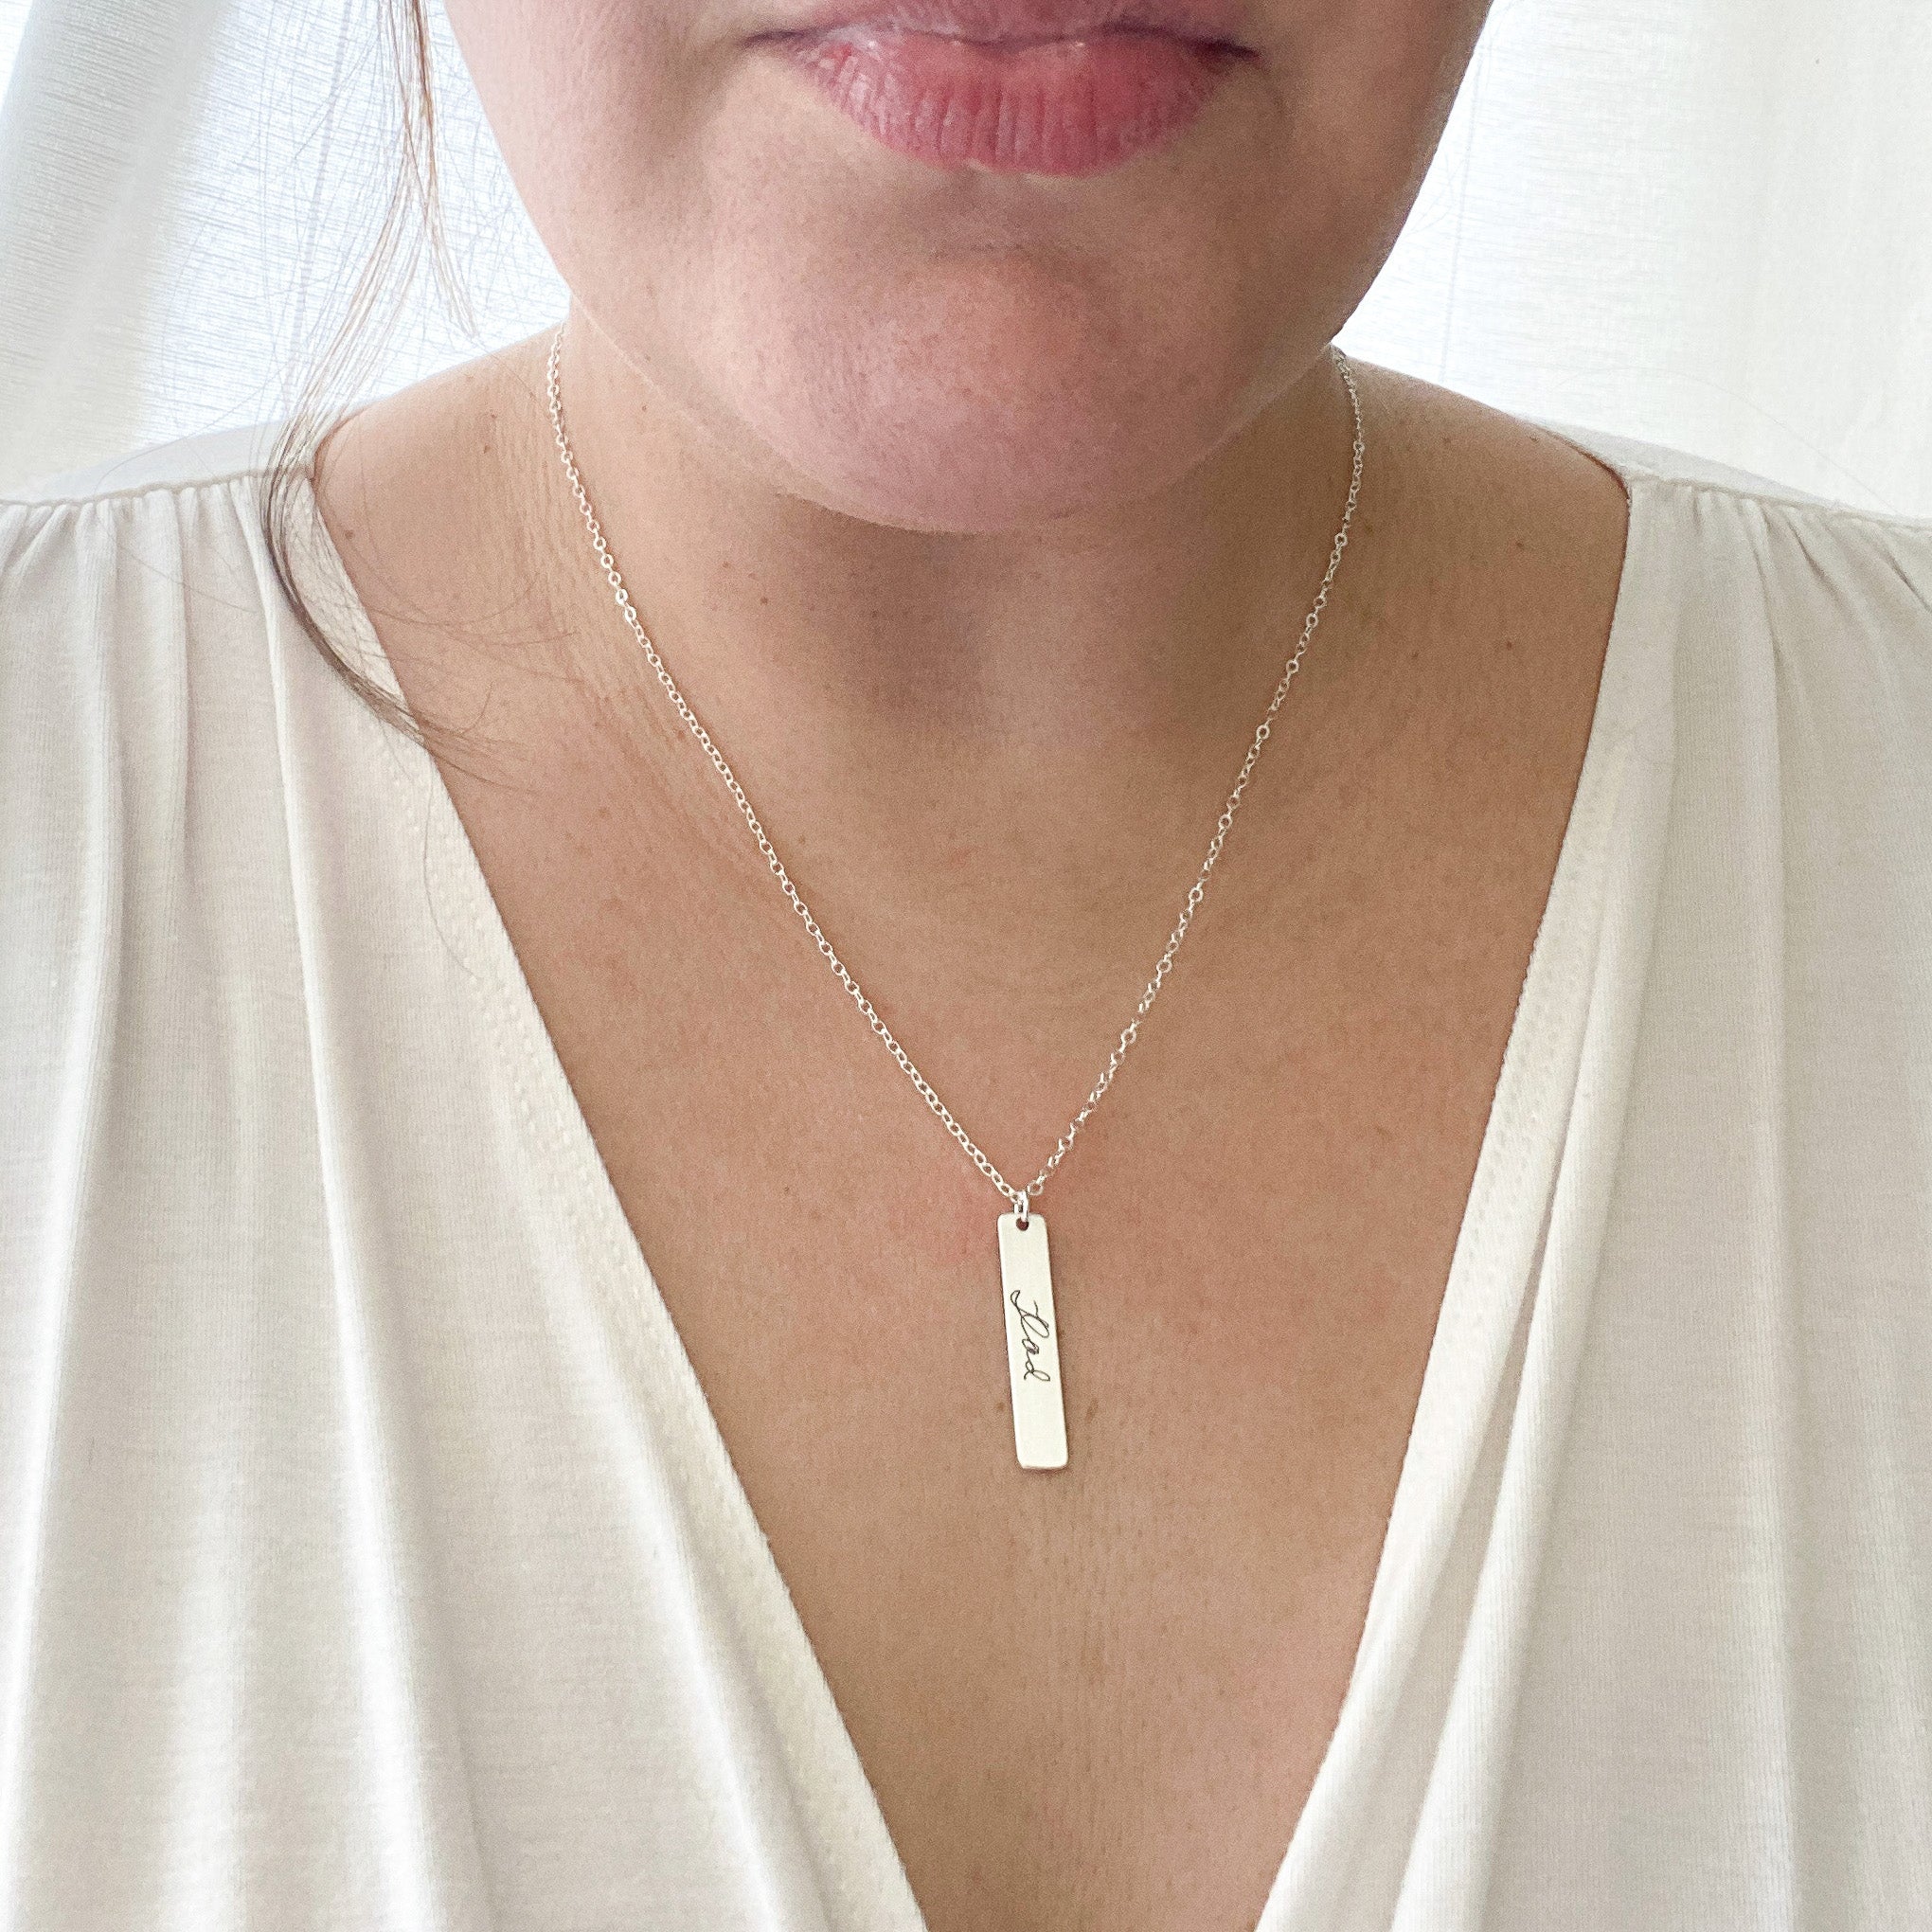 Handwriting Necklace | Caitlyn Minimalist Sterling Silver / 21 Inches